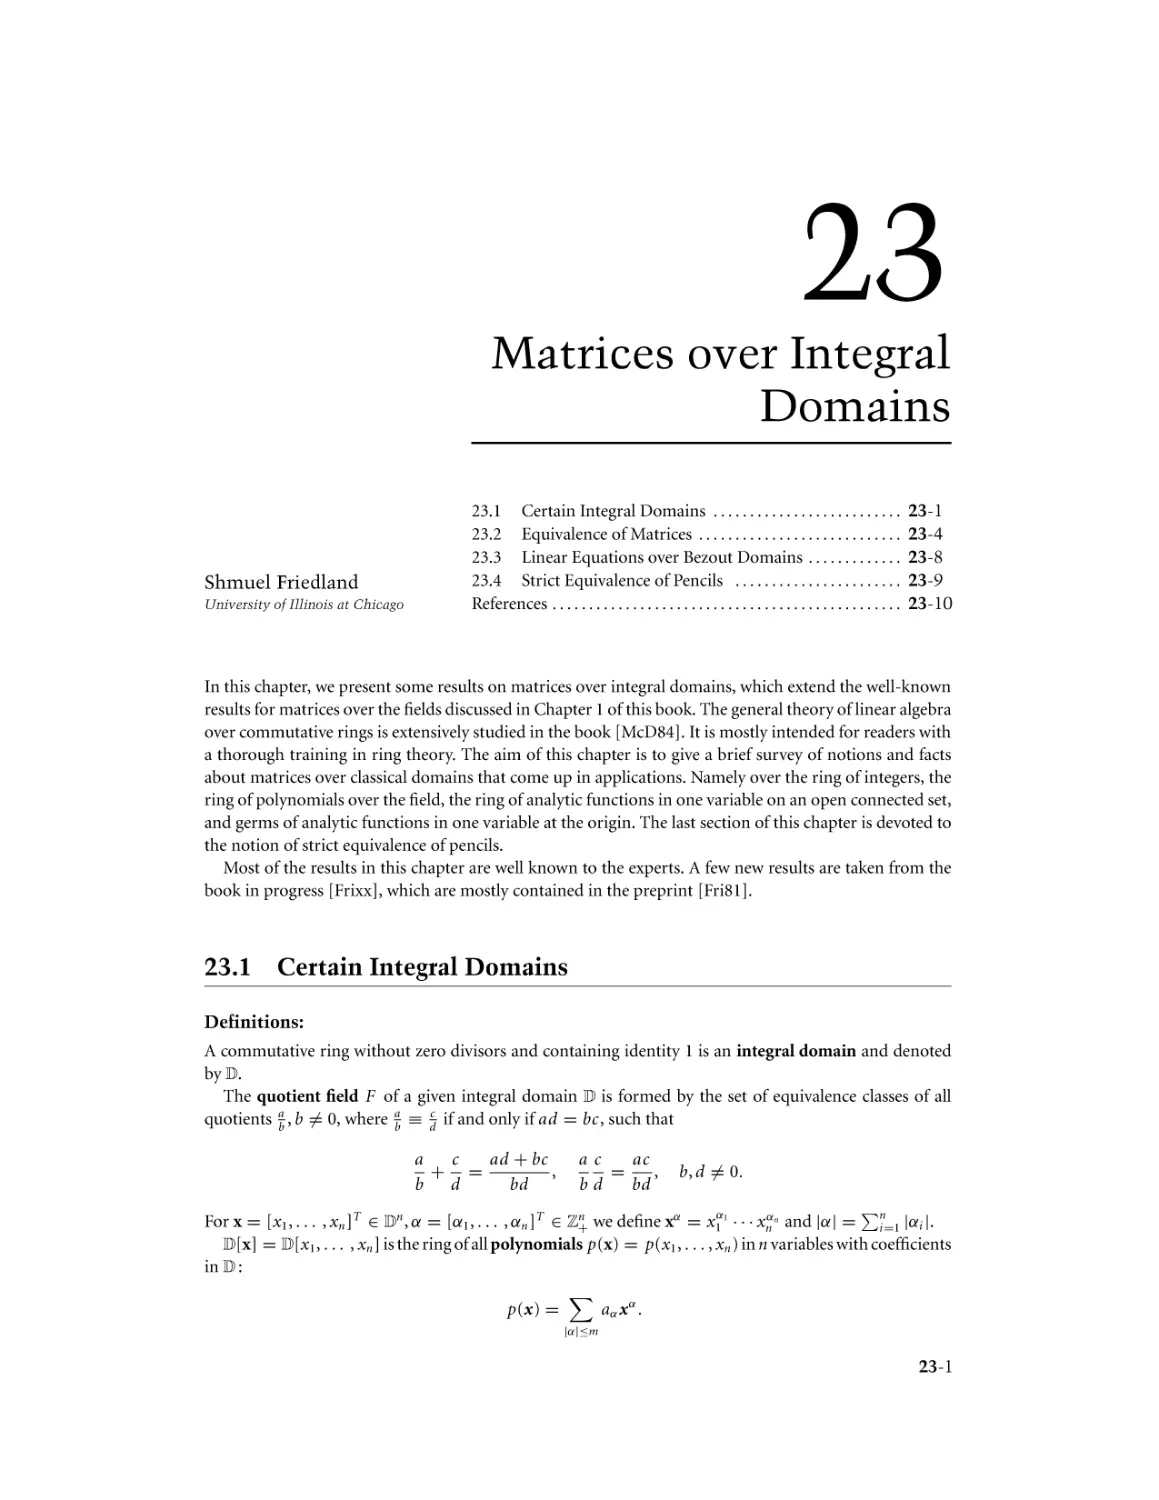 Chapter 23. Matrices over Integral Domains